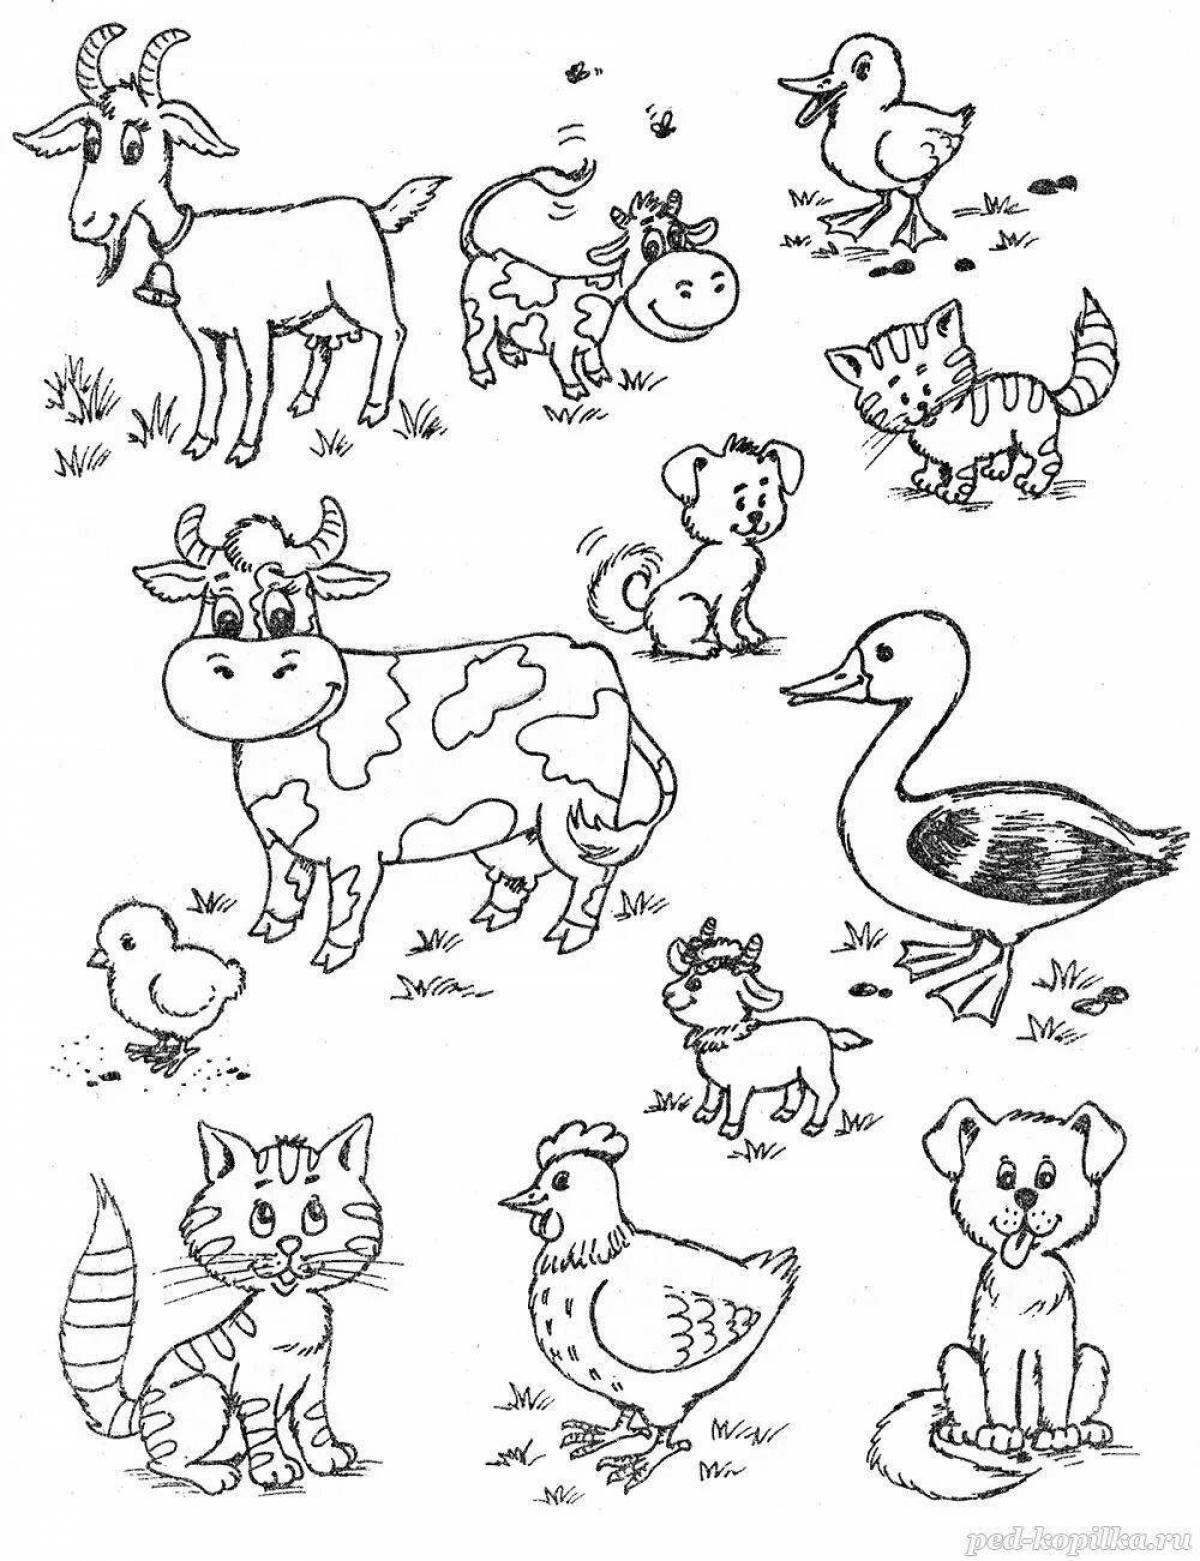 Colorful animal games coloring book